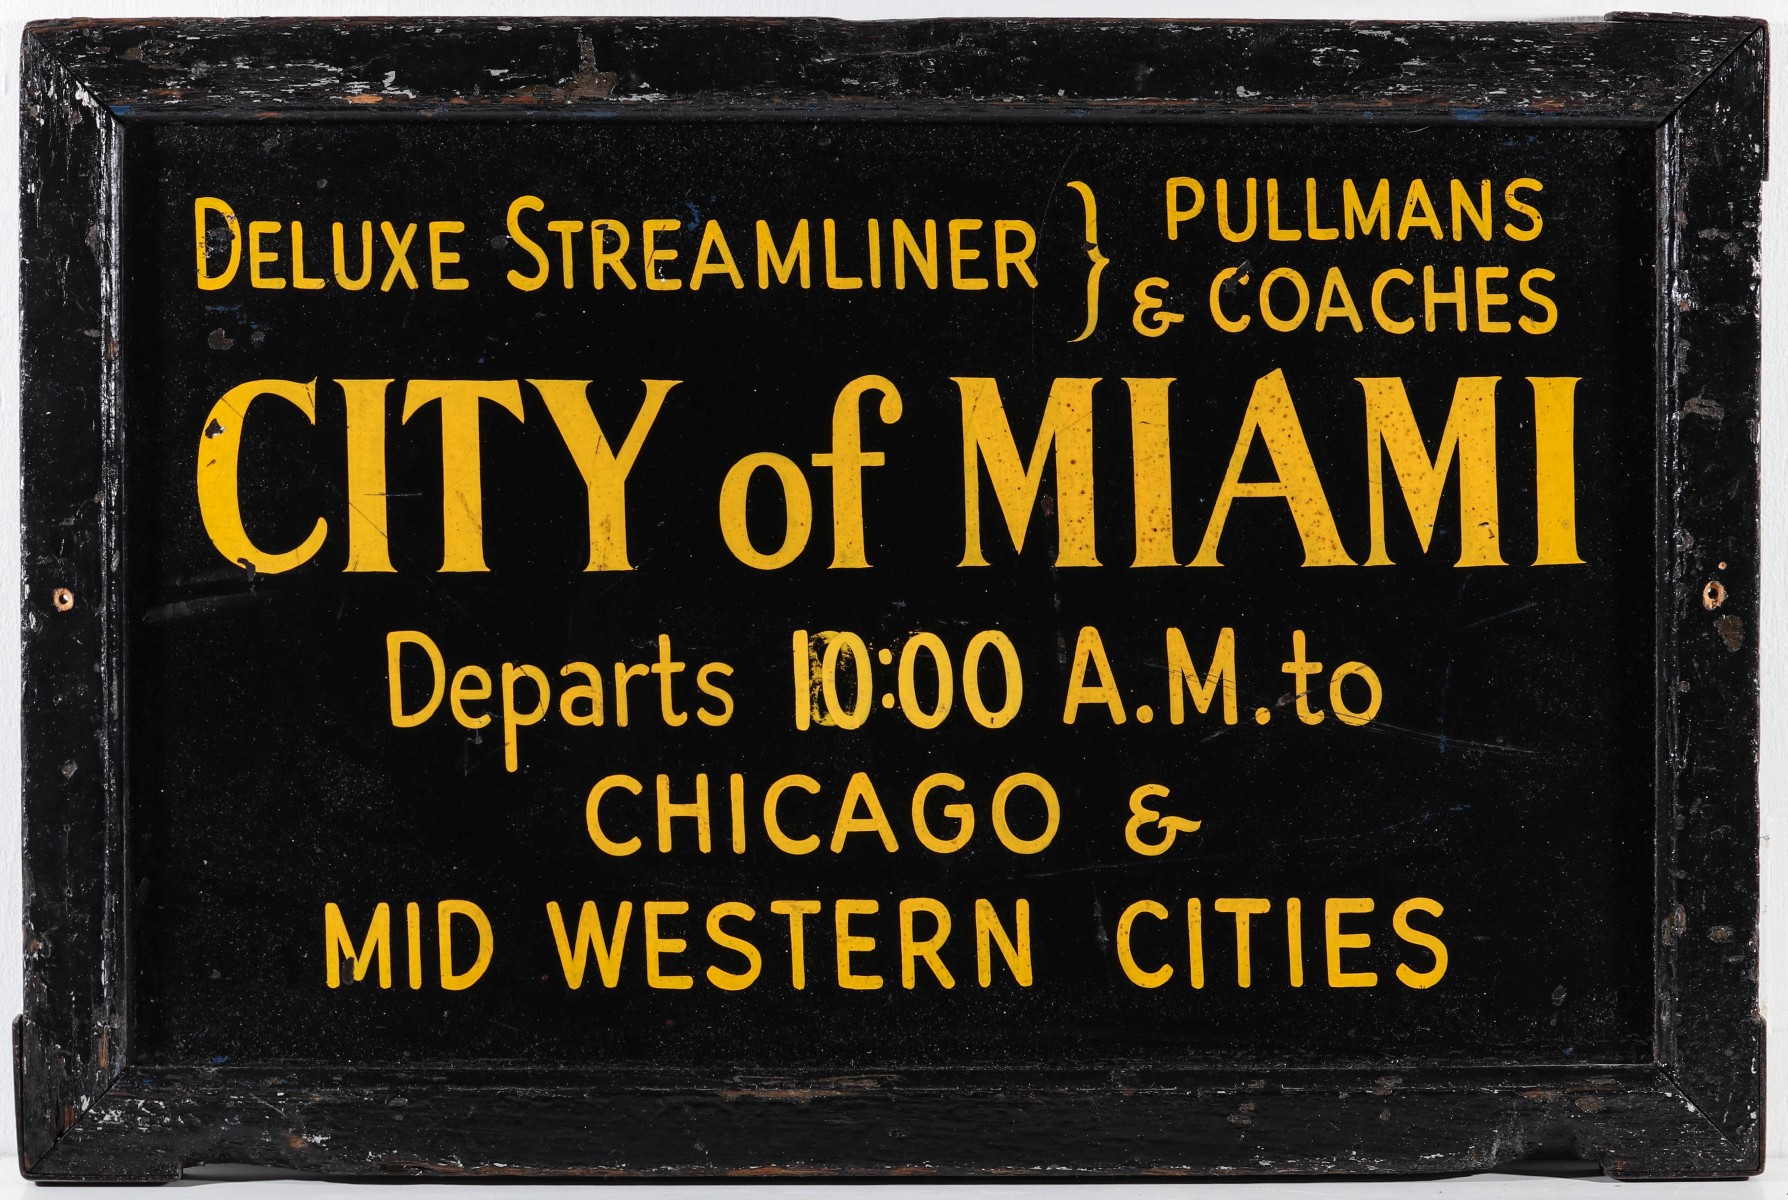 A WOOD GATE SIGN FOR CITY OF MIAMI DELUXE STREAMLINER